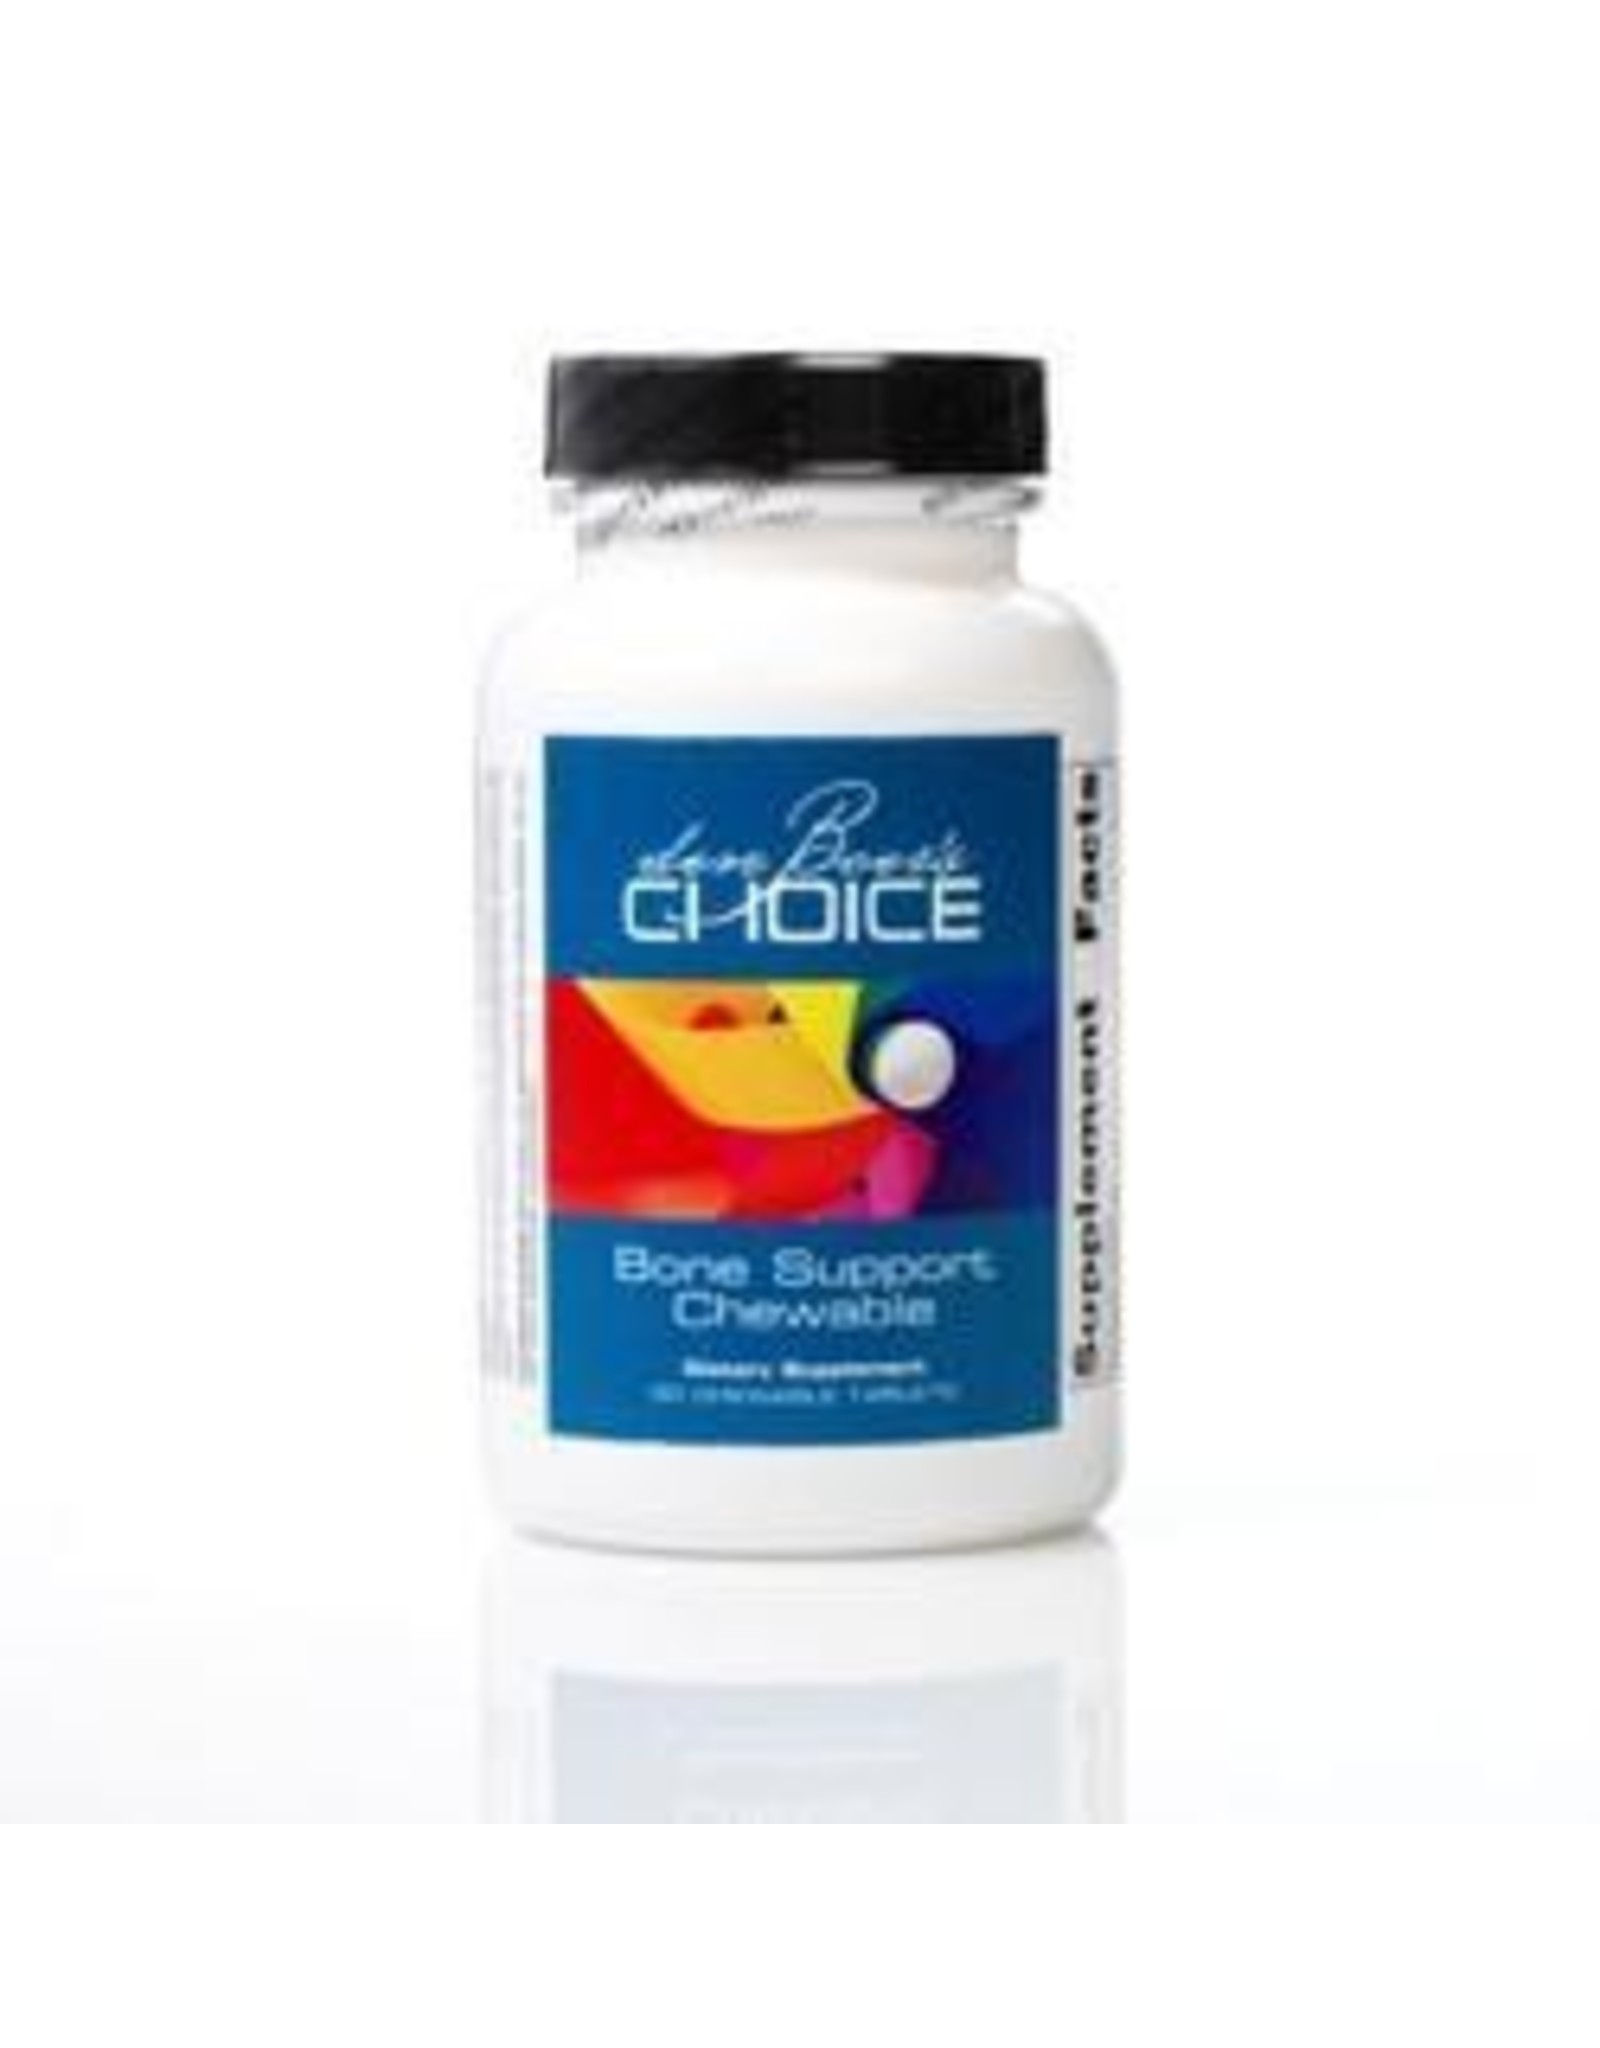 Bone Support Chewable 60 ct